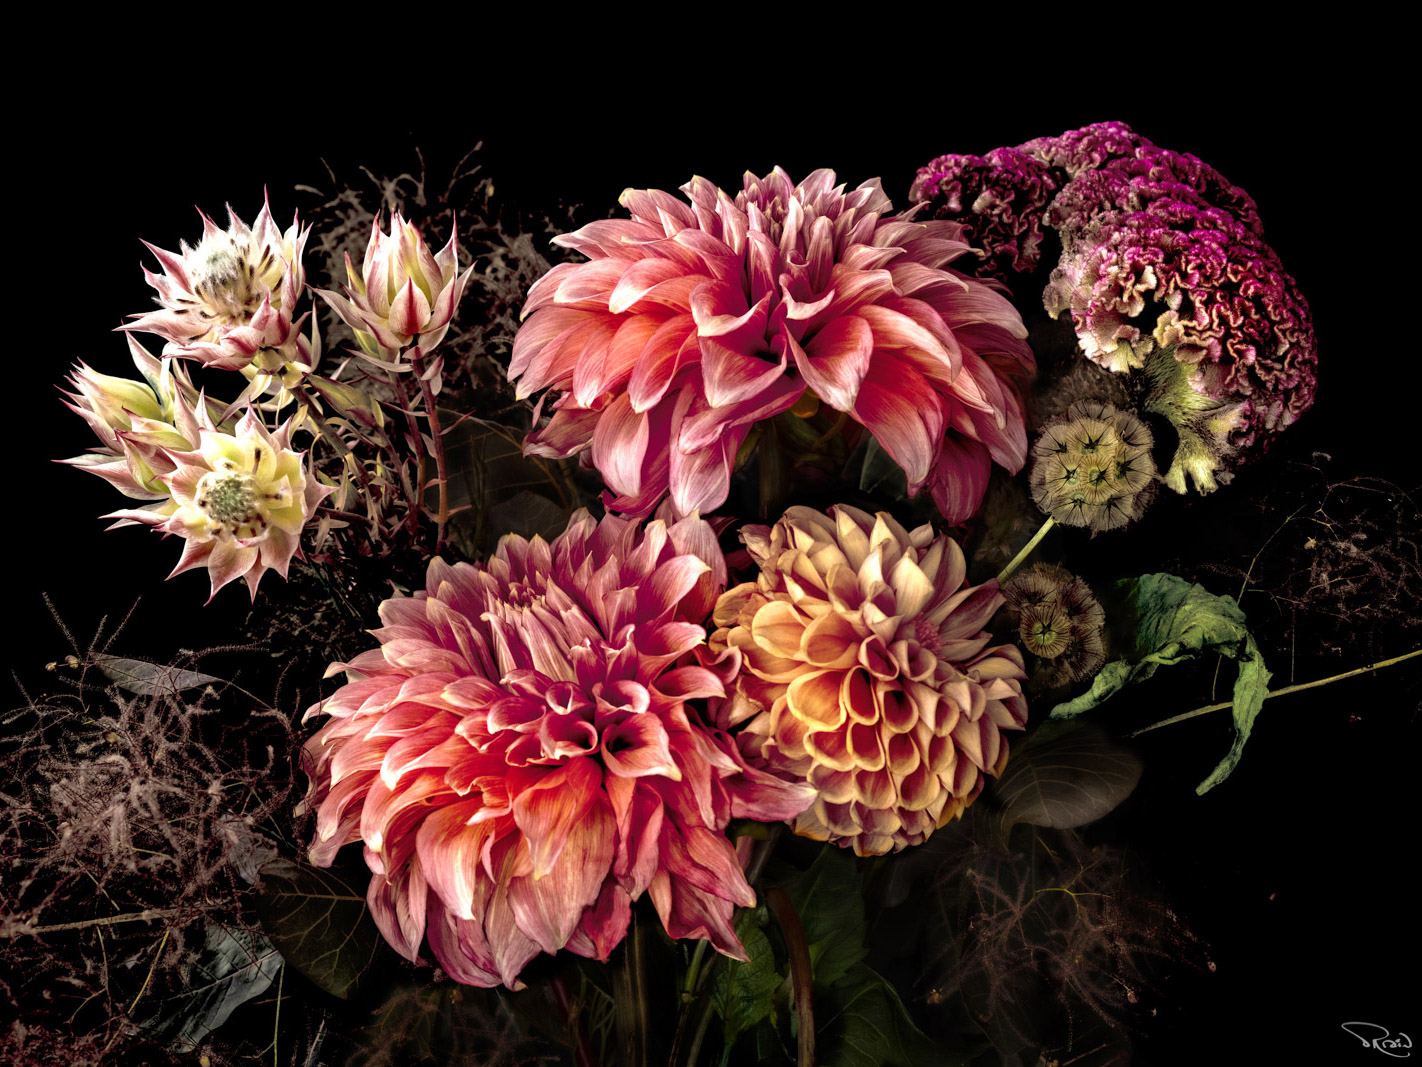 A bouquet of dahlias, protea and scabiosa pods bursts with color from within deep shadows.